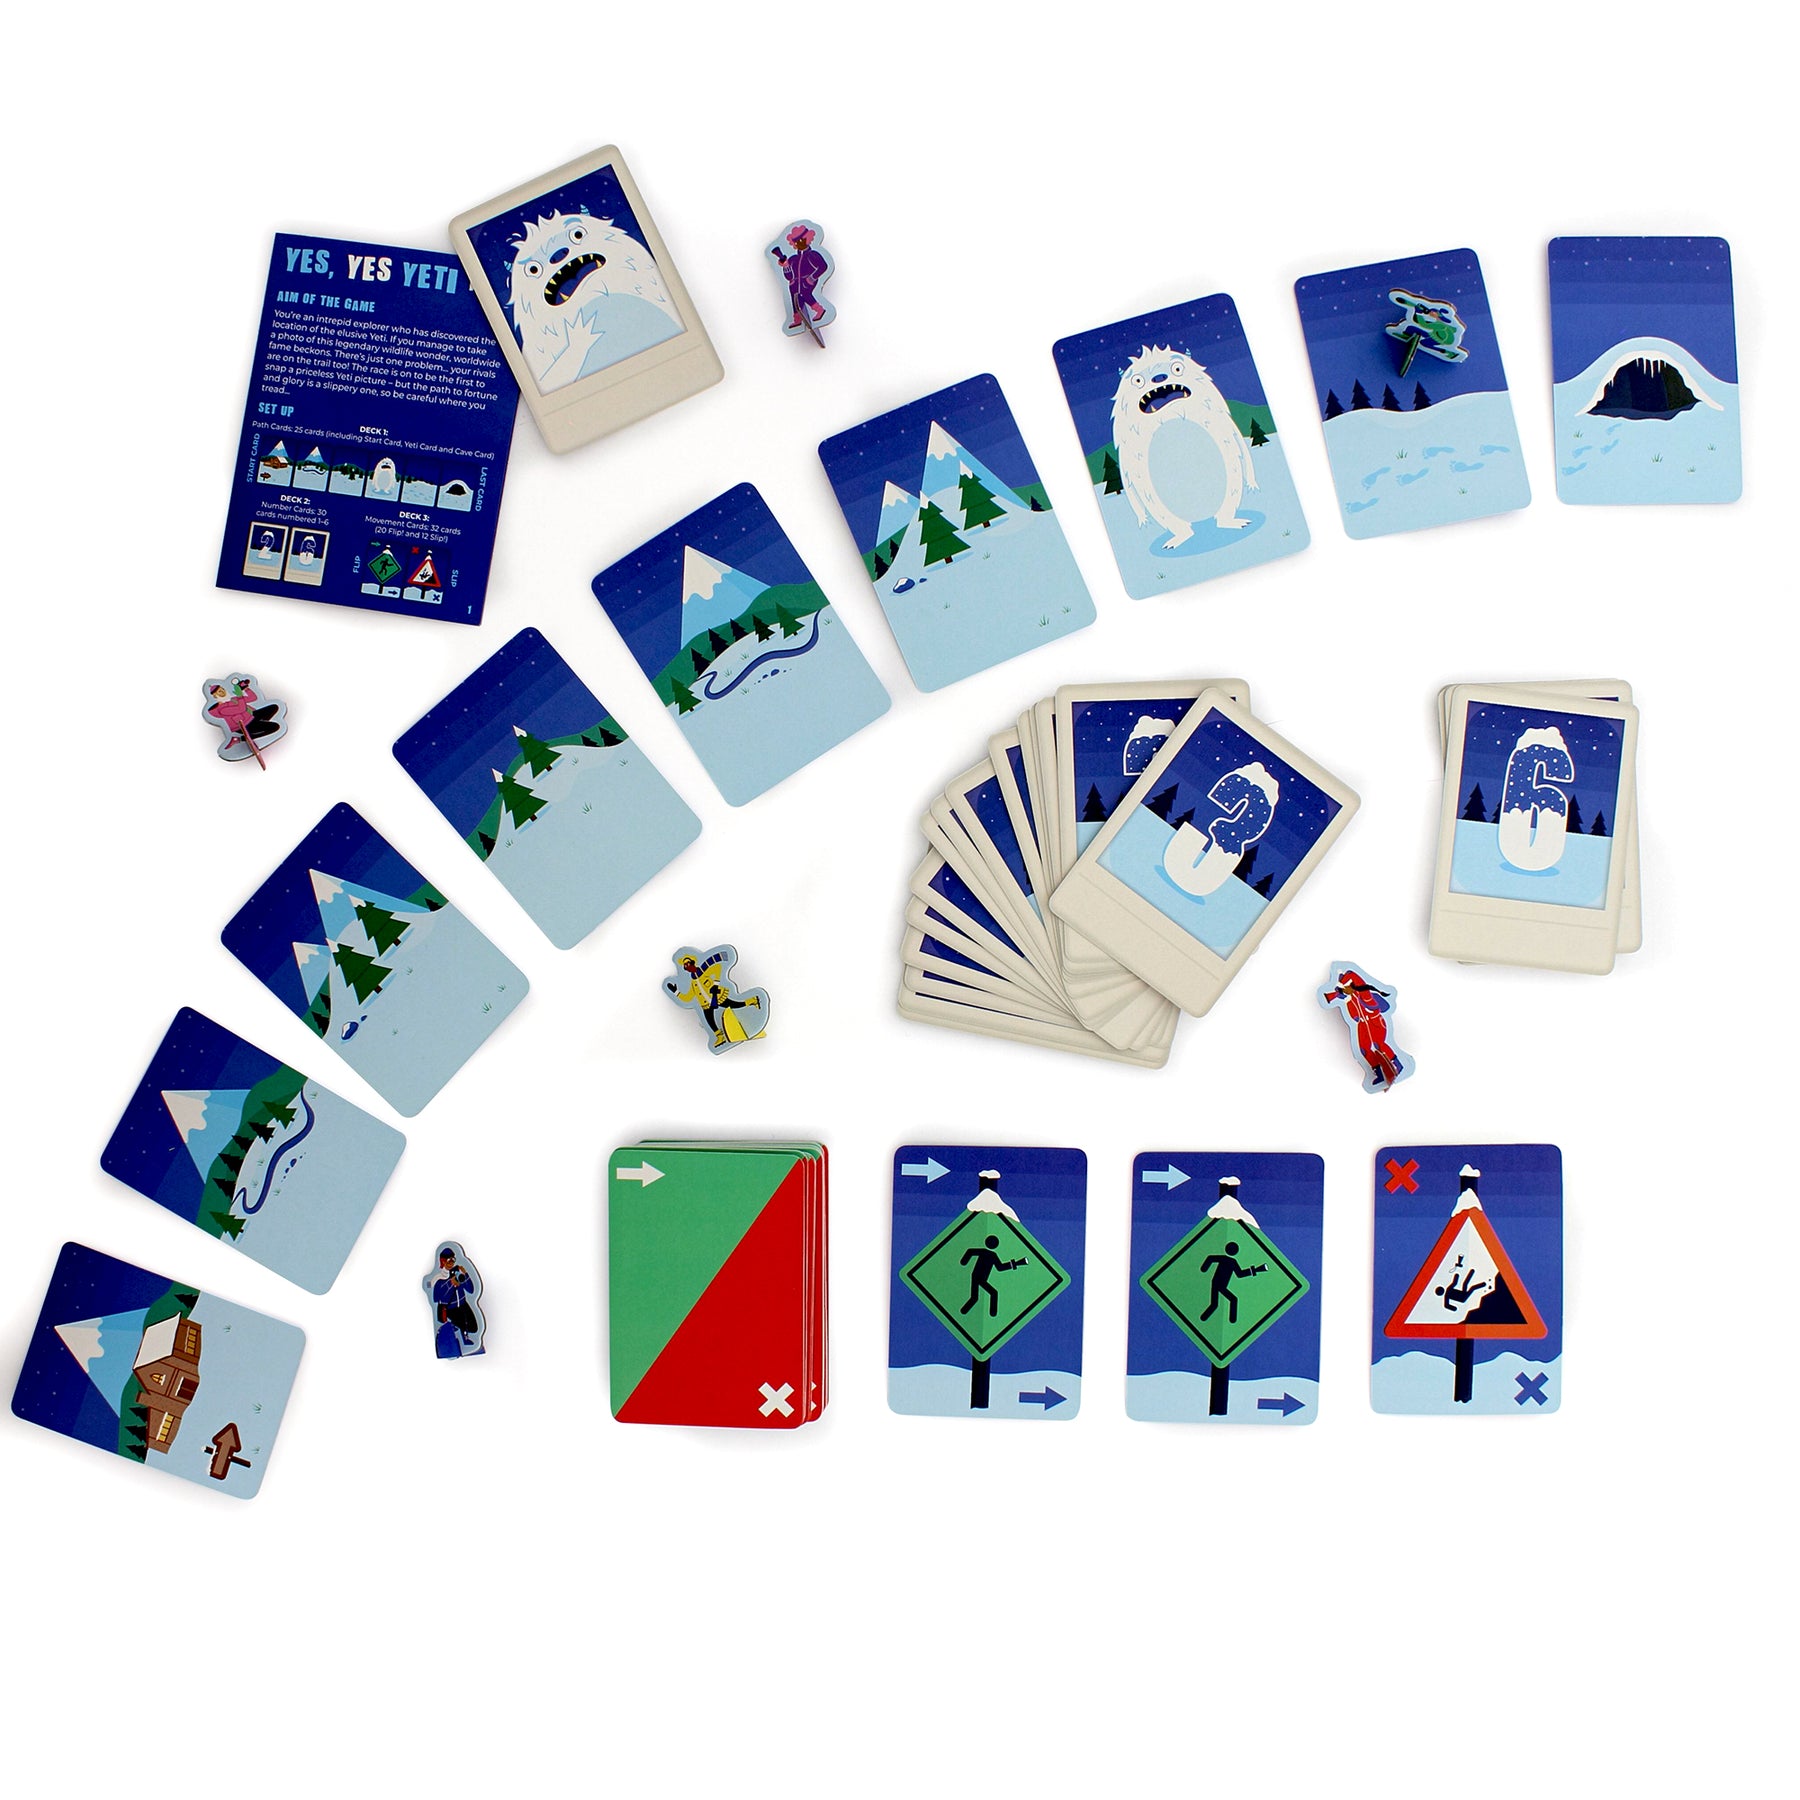 Ginger Fox - Yes, Yes, Yeti Card Game